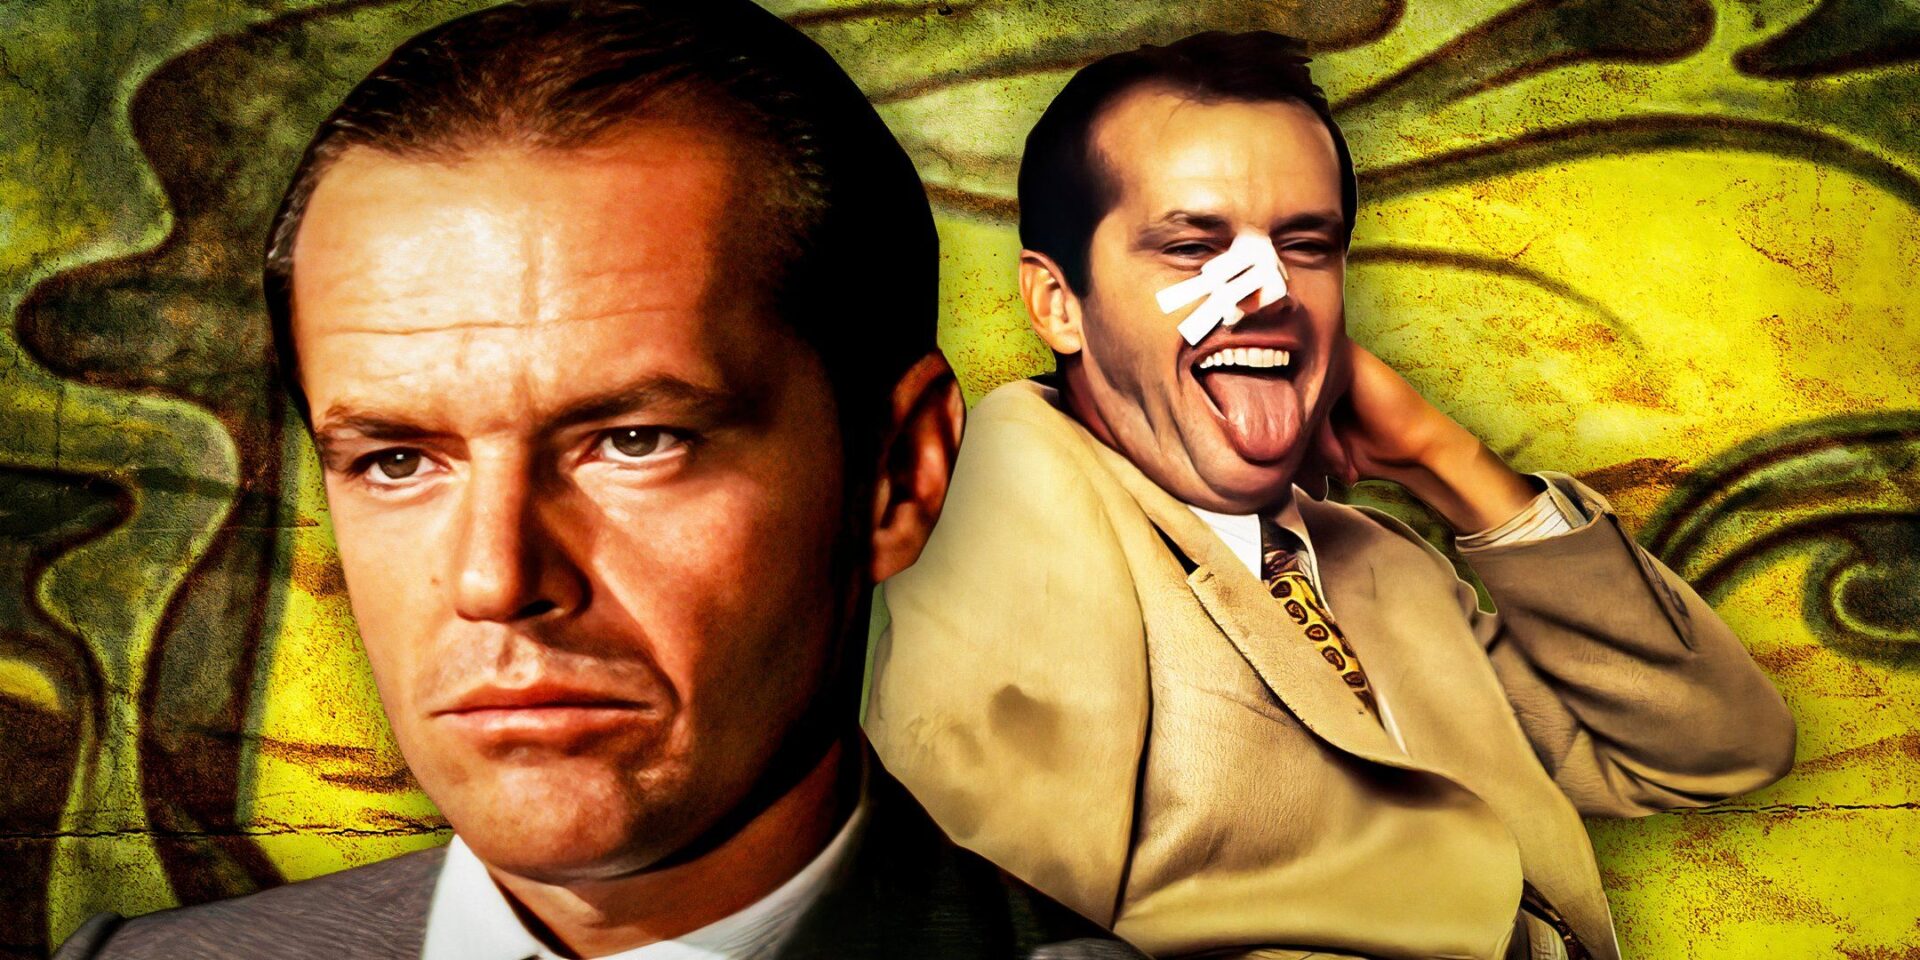 Chinatown: 10 Things You Probably Didn't Know About The Jack Nicholson Movie